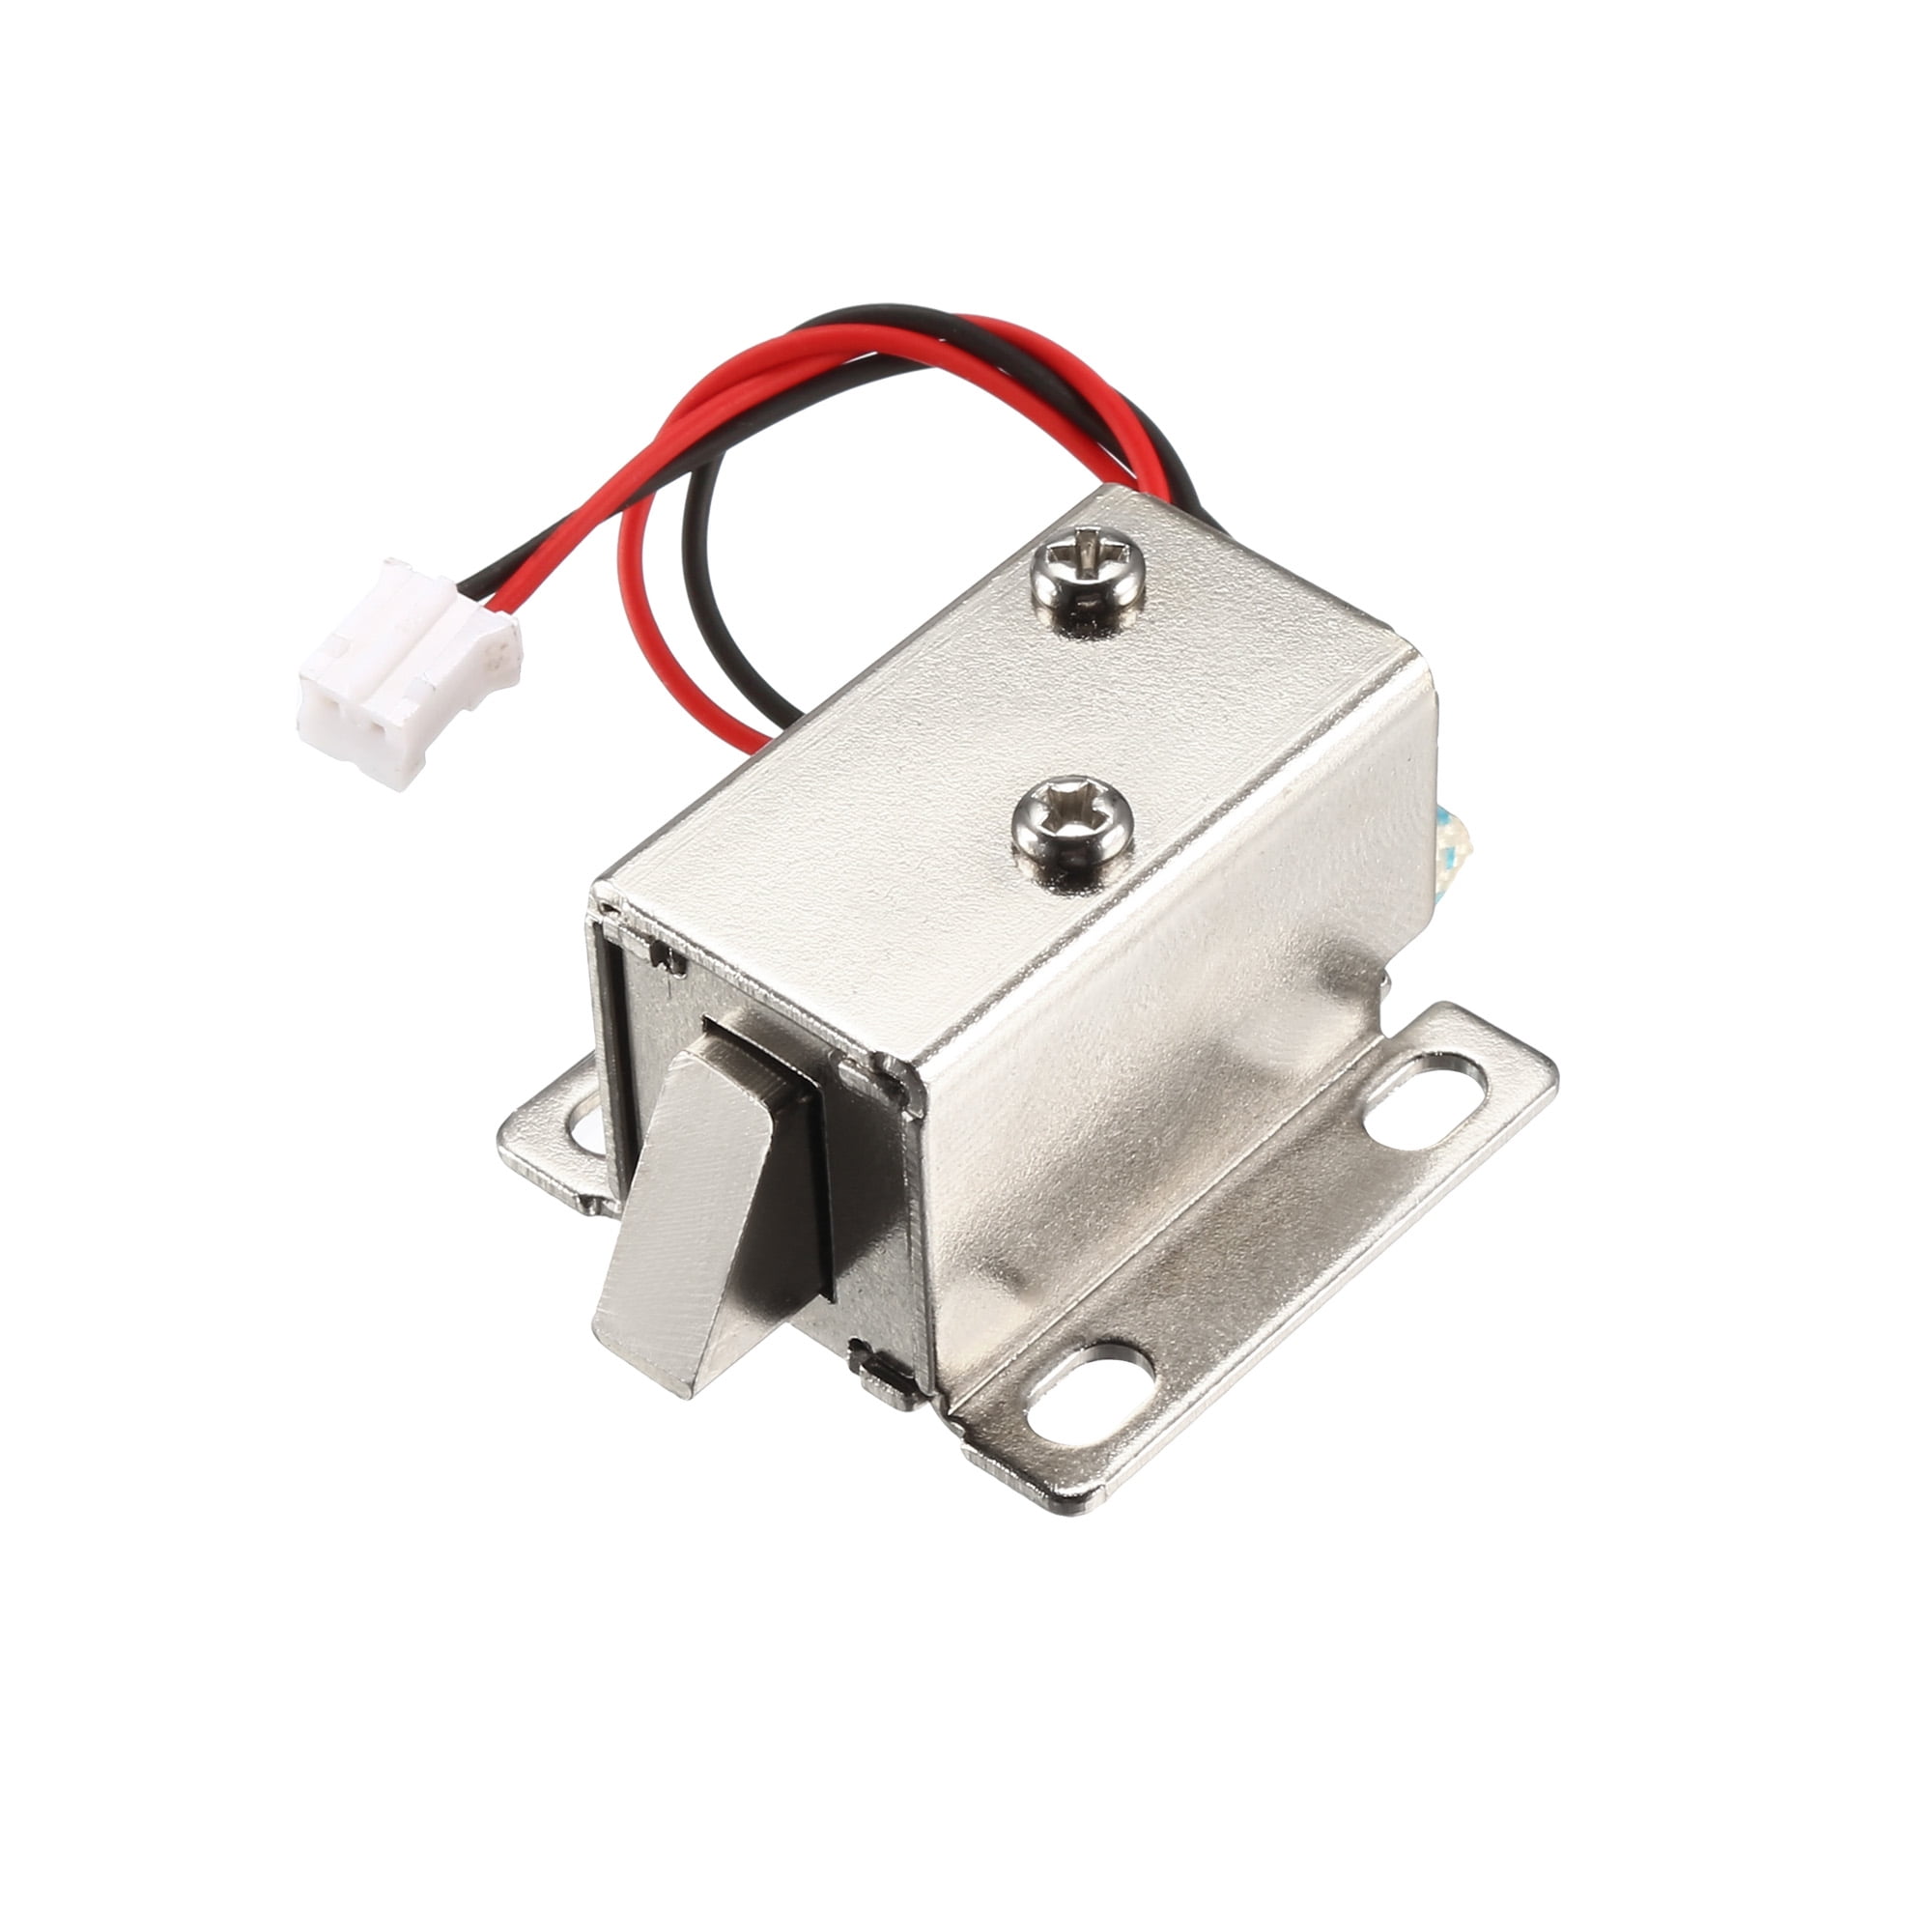 DC12V 0.42A 6mm Mini Electromagnetic Solenoid Lock Assembly Tongue Up ...